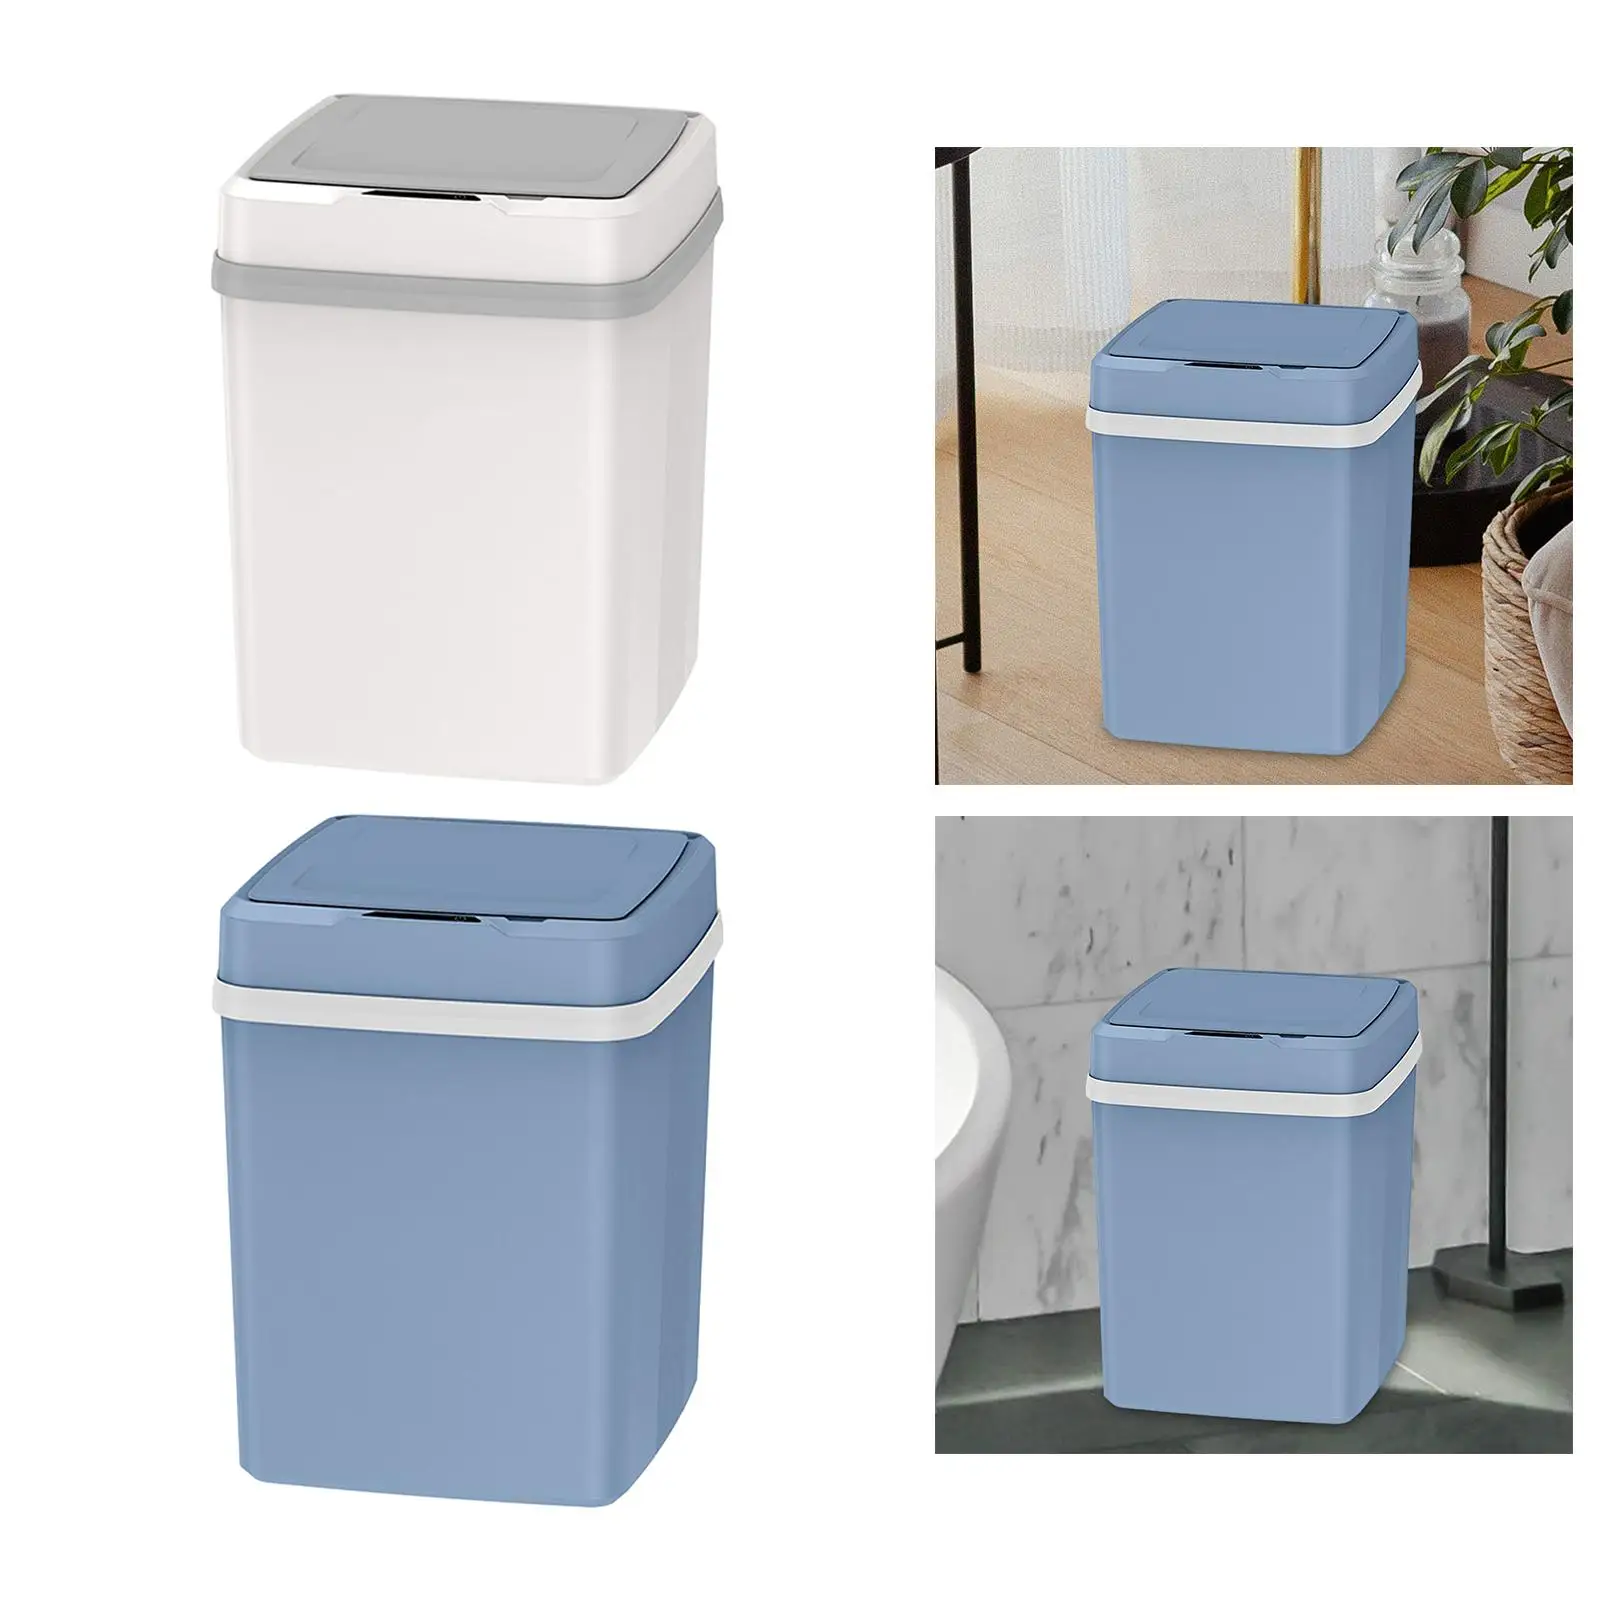 12L Automatic Trash Can Versatile Silent Opening and Closing Wastebasket for Office Bedroom Kitchen Bathroom USB Rechargeable